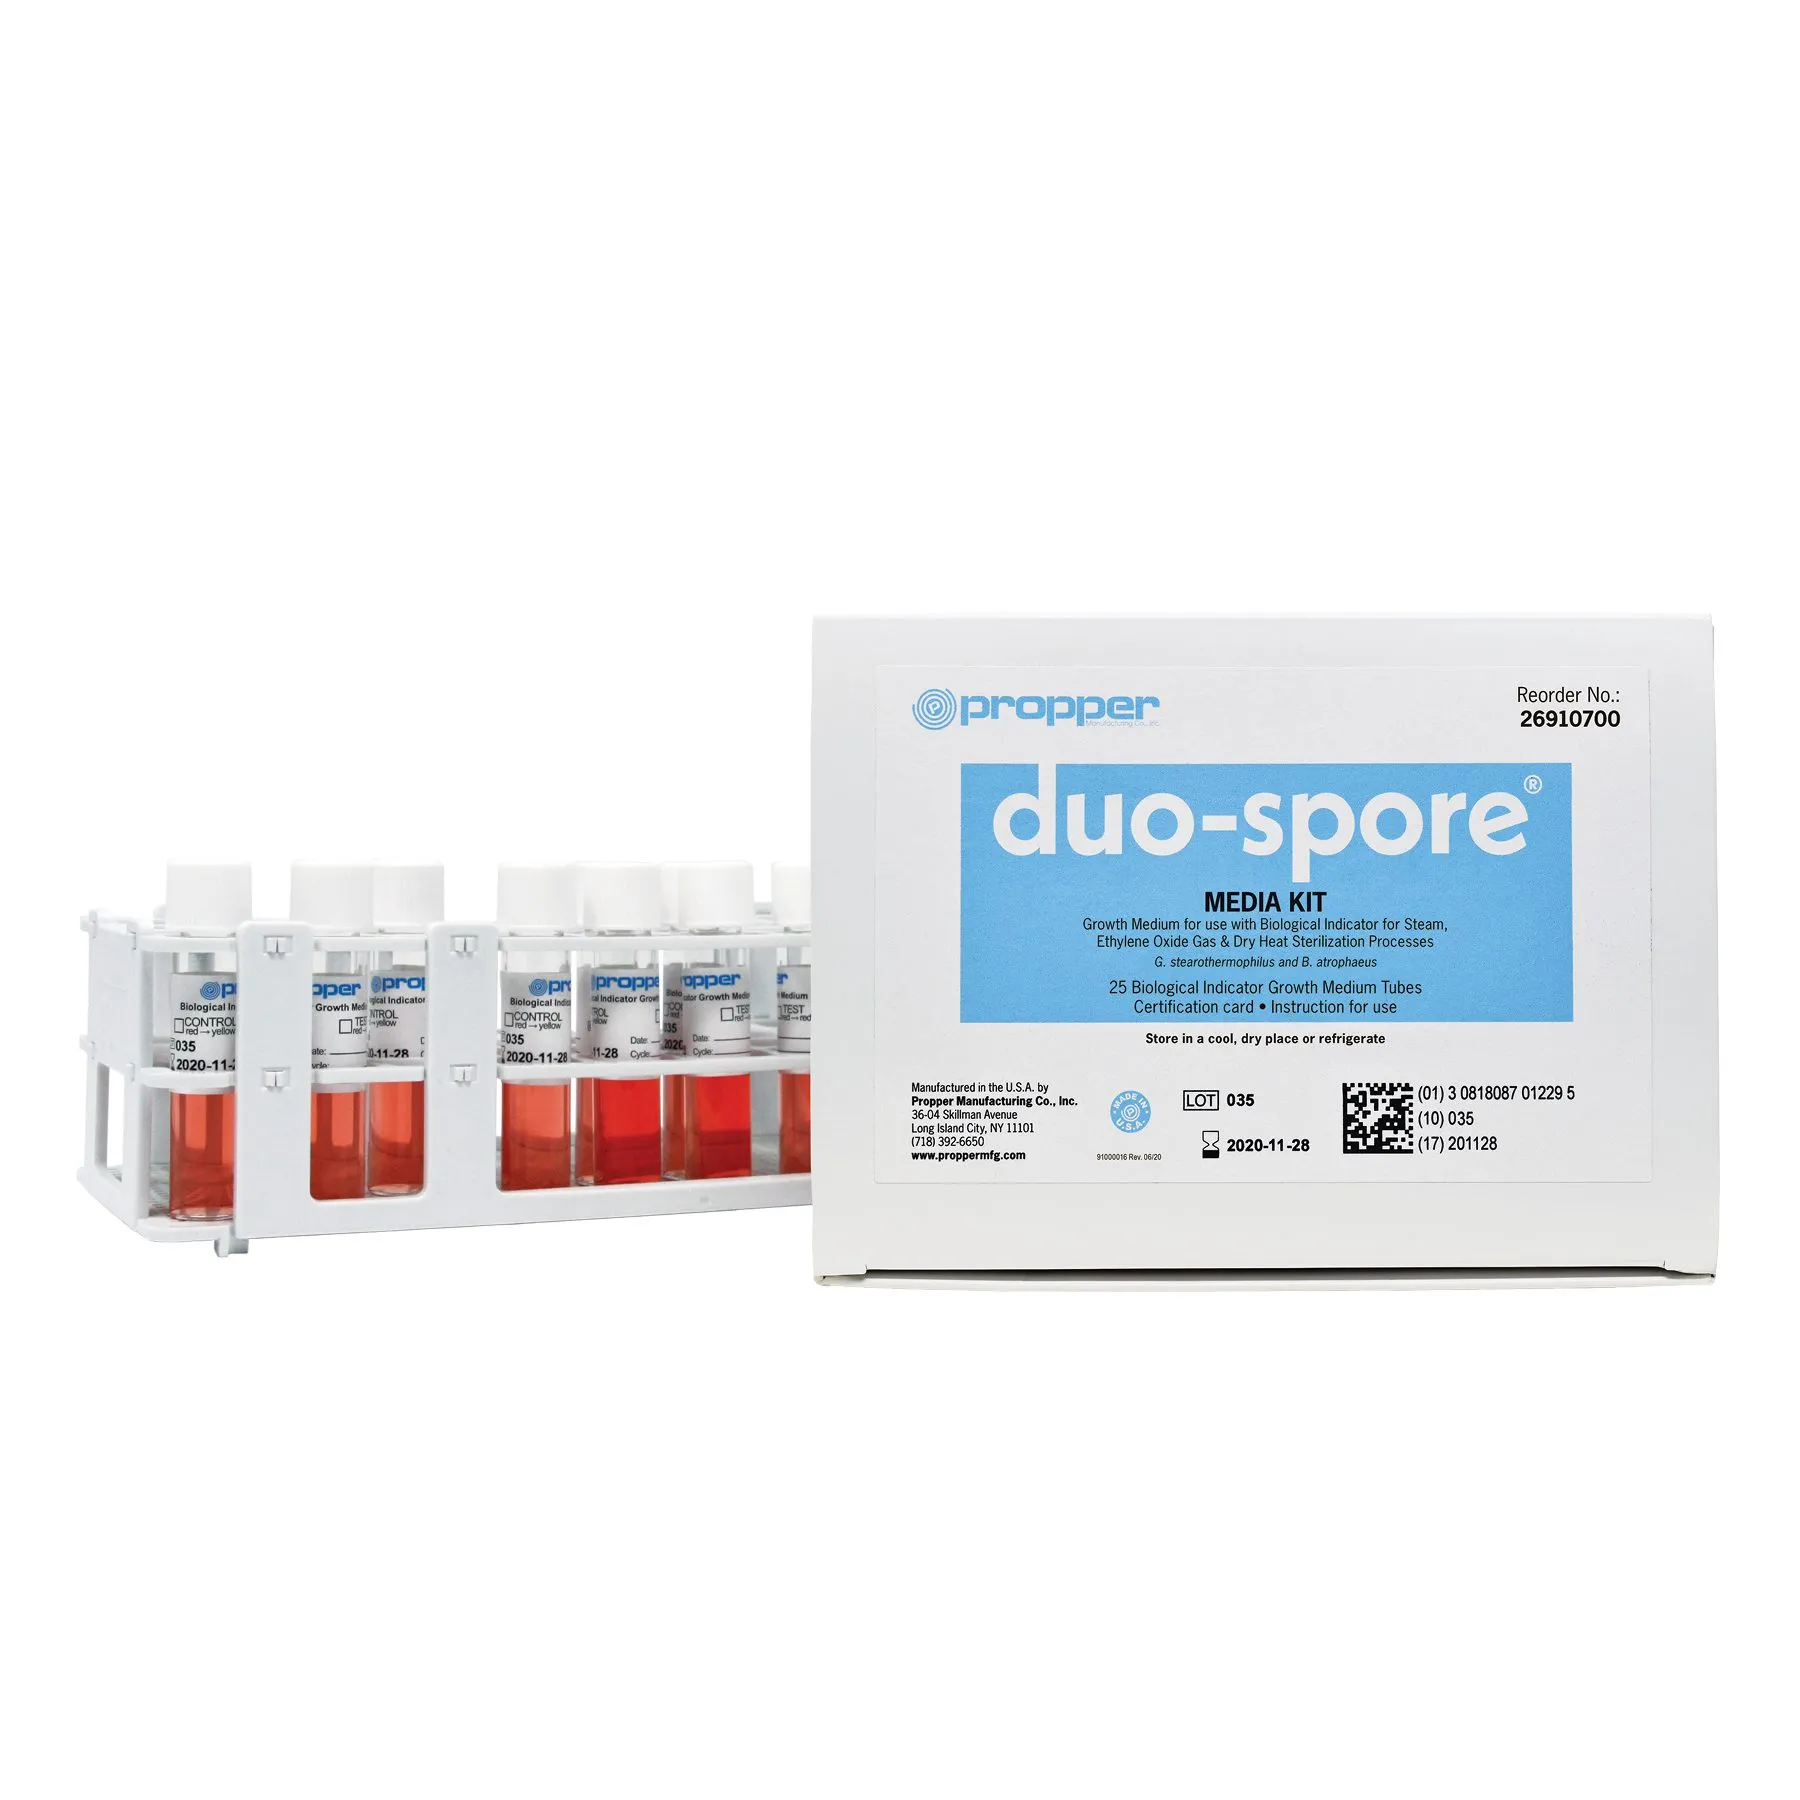 Propper Manufacturing - From: 26910700 To: 26910800 - Duo Spore Biological Indicator Growth Media Vials